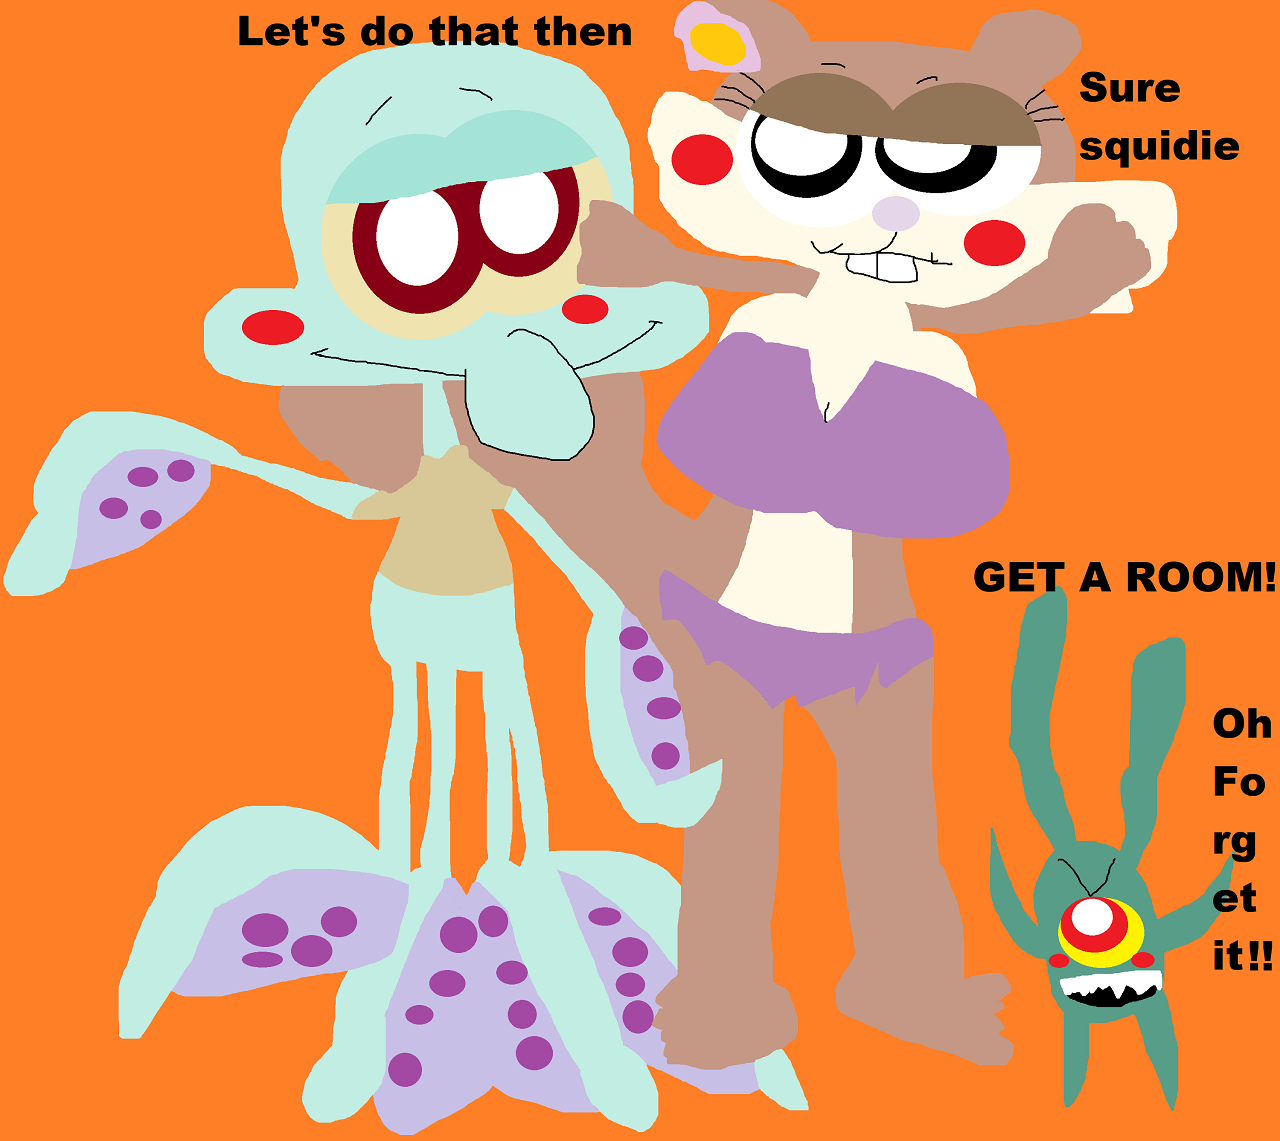 Plankton Yells Get A Room To Squidward And Sandy Alt by Falconlobo